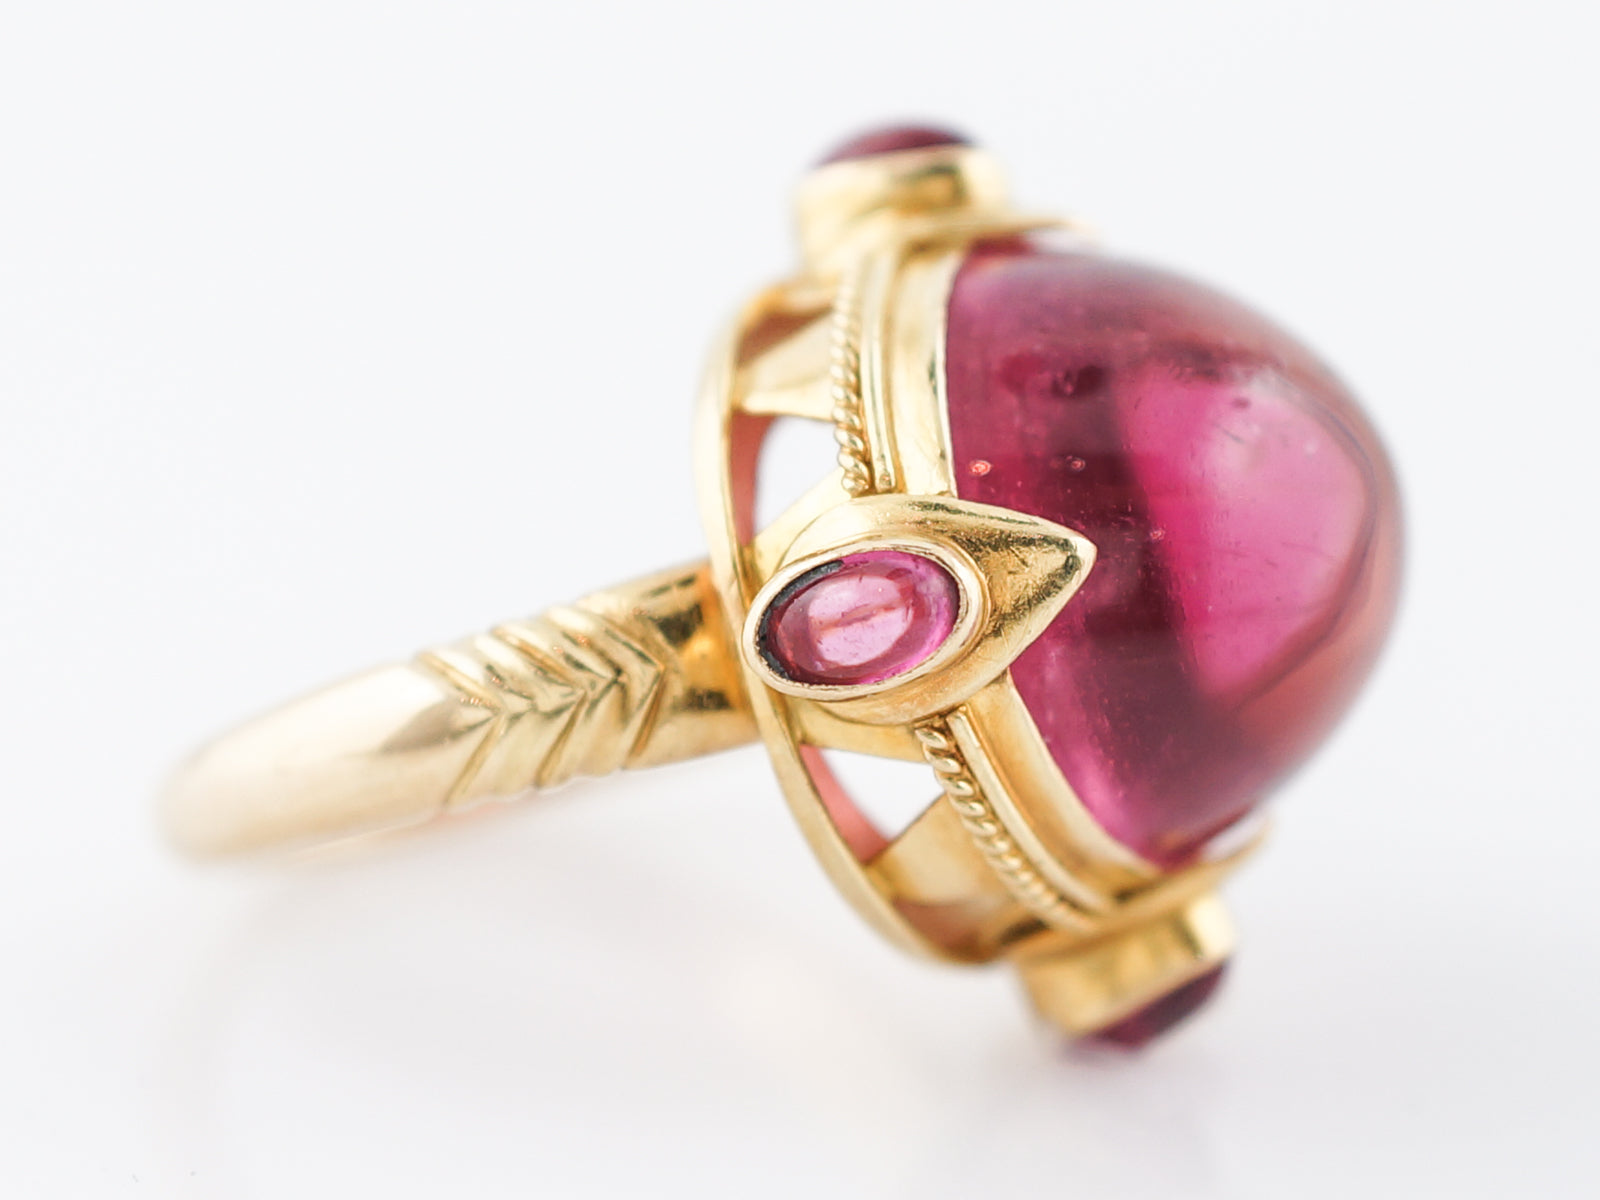 Cocktail Ring Modern 24.36 Oval Cabochon Cut Pink Tourmaline in 18k Yellow Gold